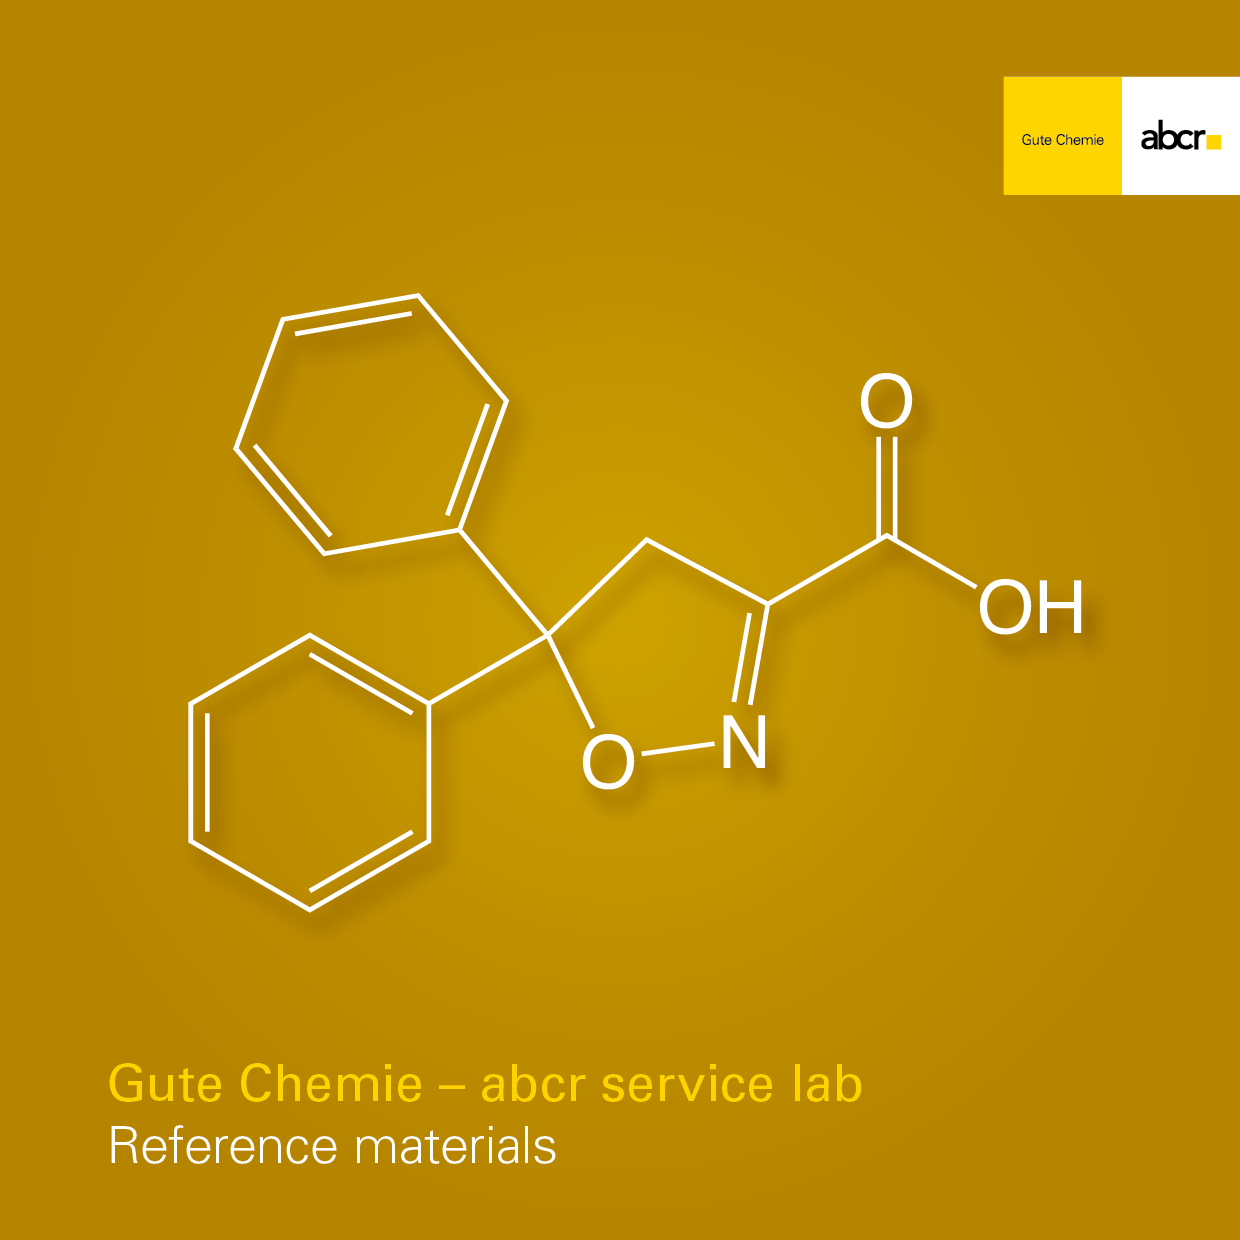 Reference materials - abcr service lab